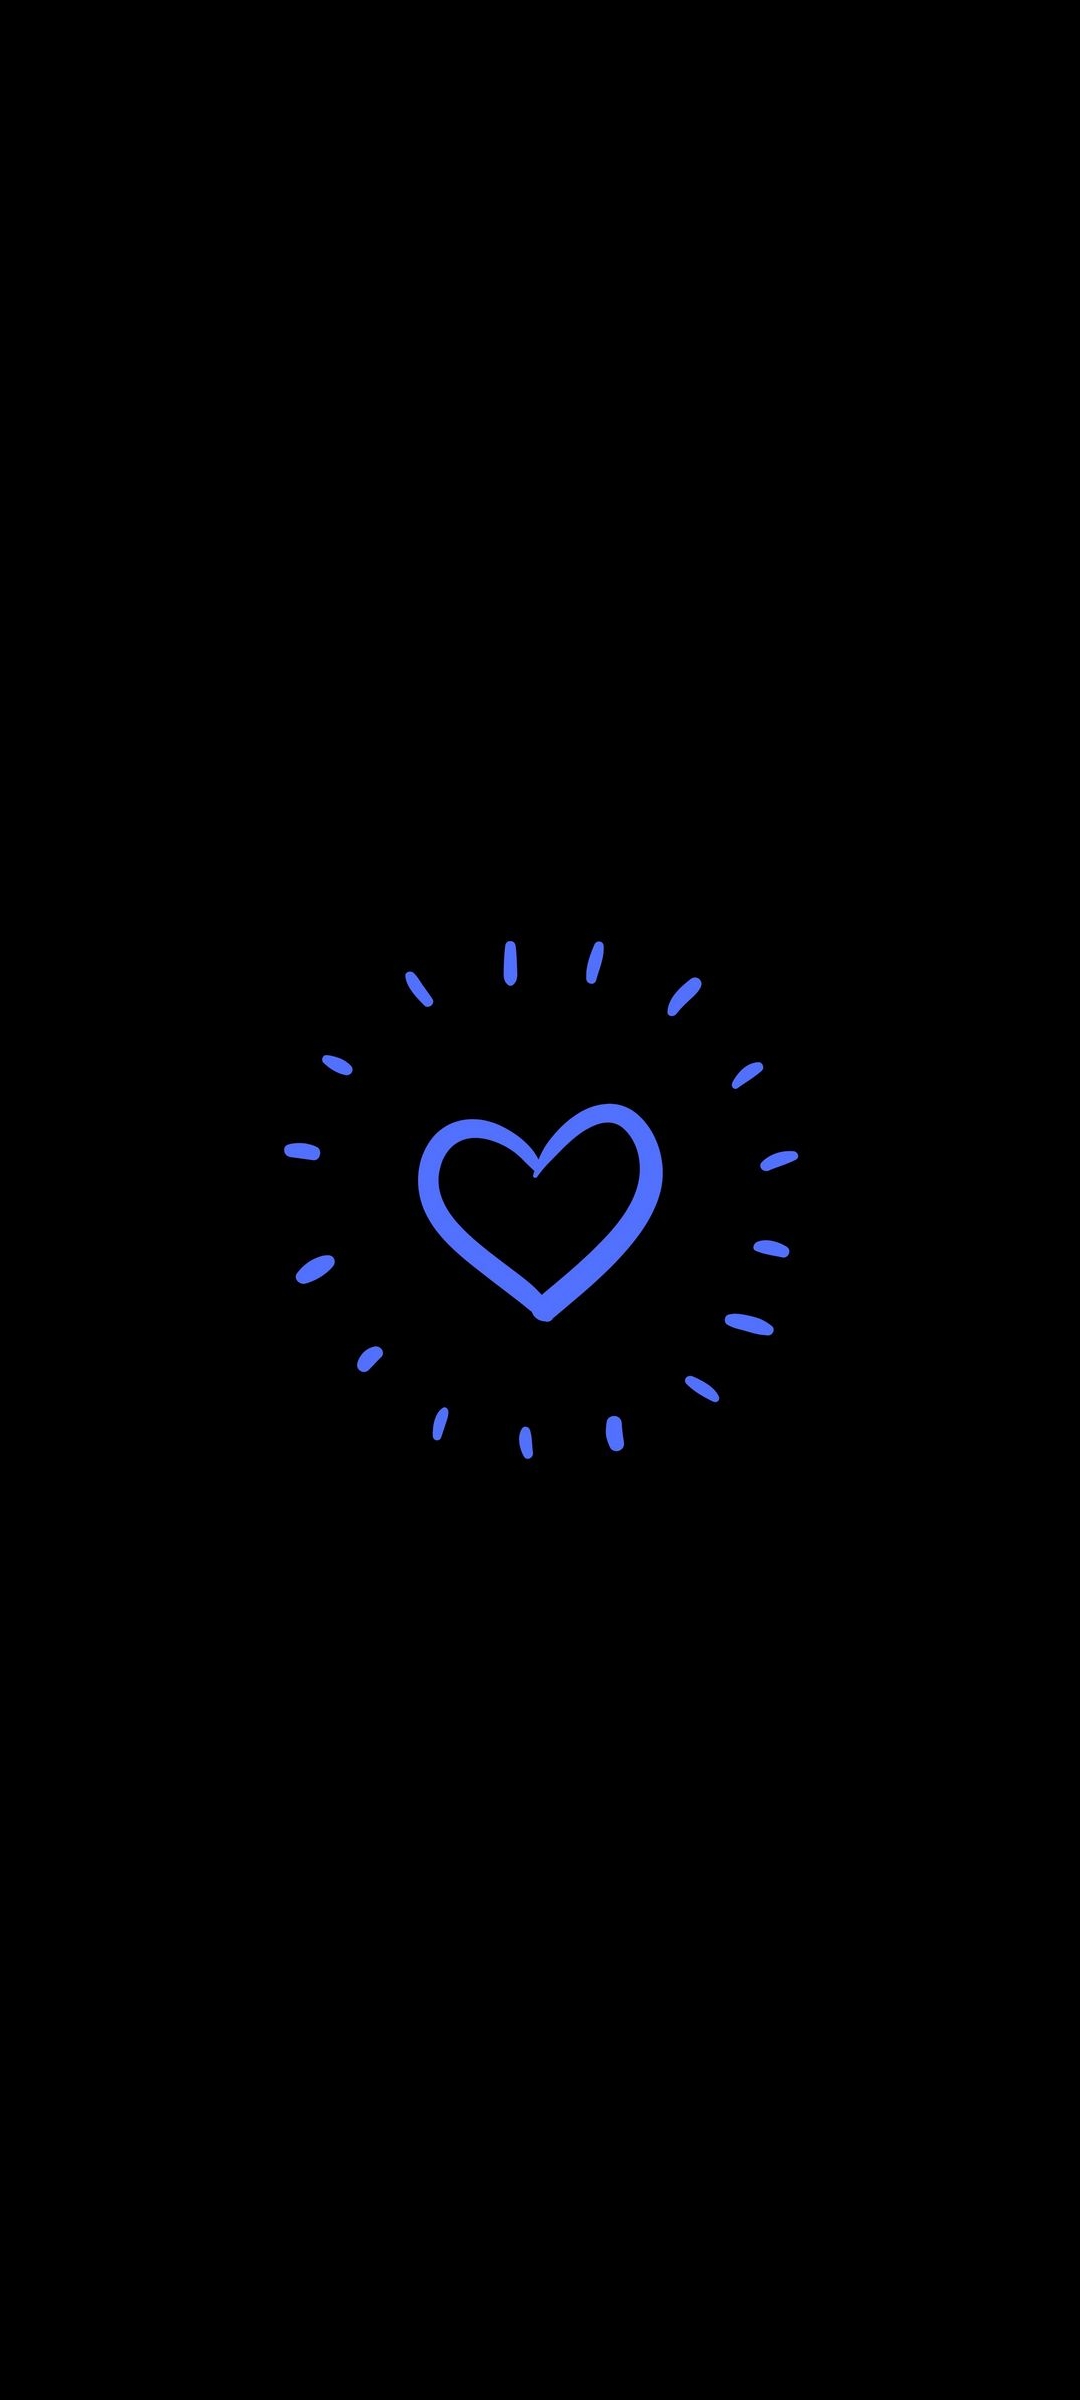 Free Blue Heart Wallpaper For Phone and Computer  Skip To My Lou